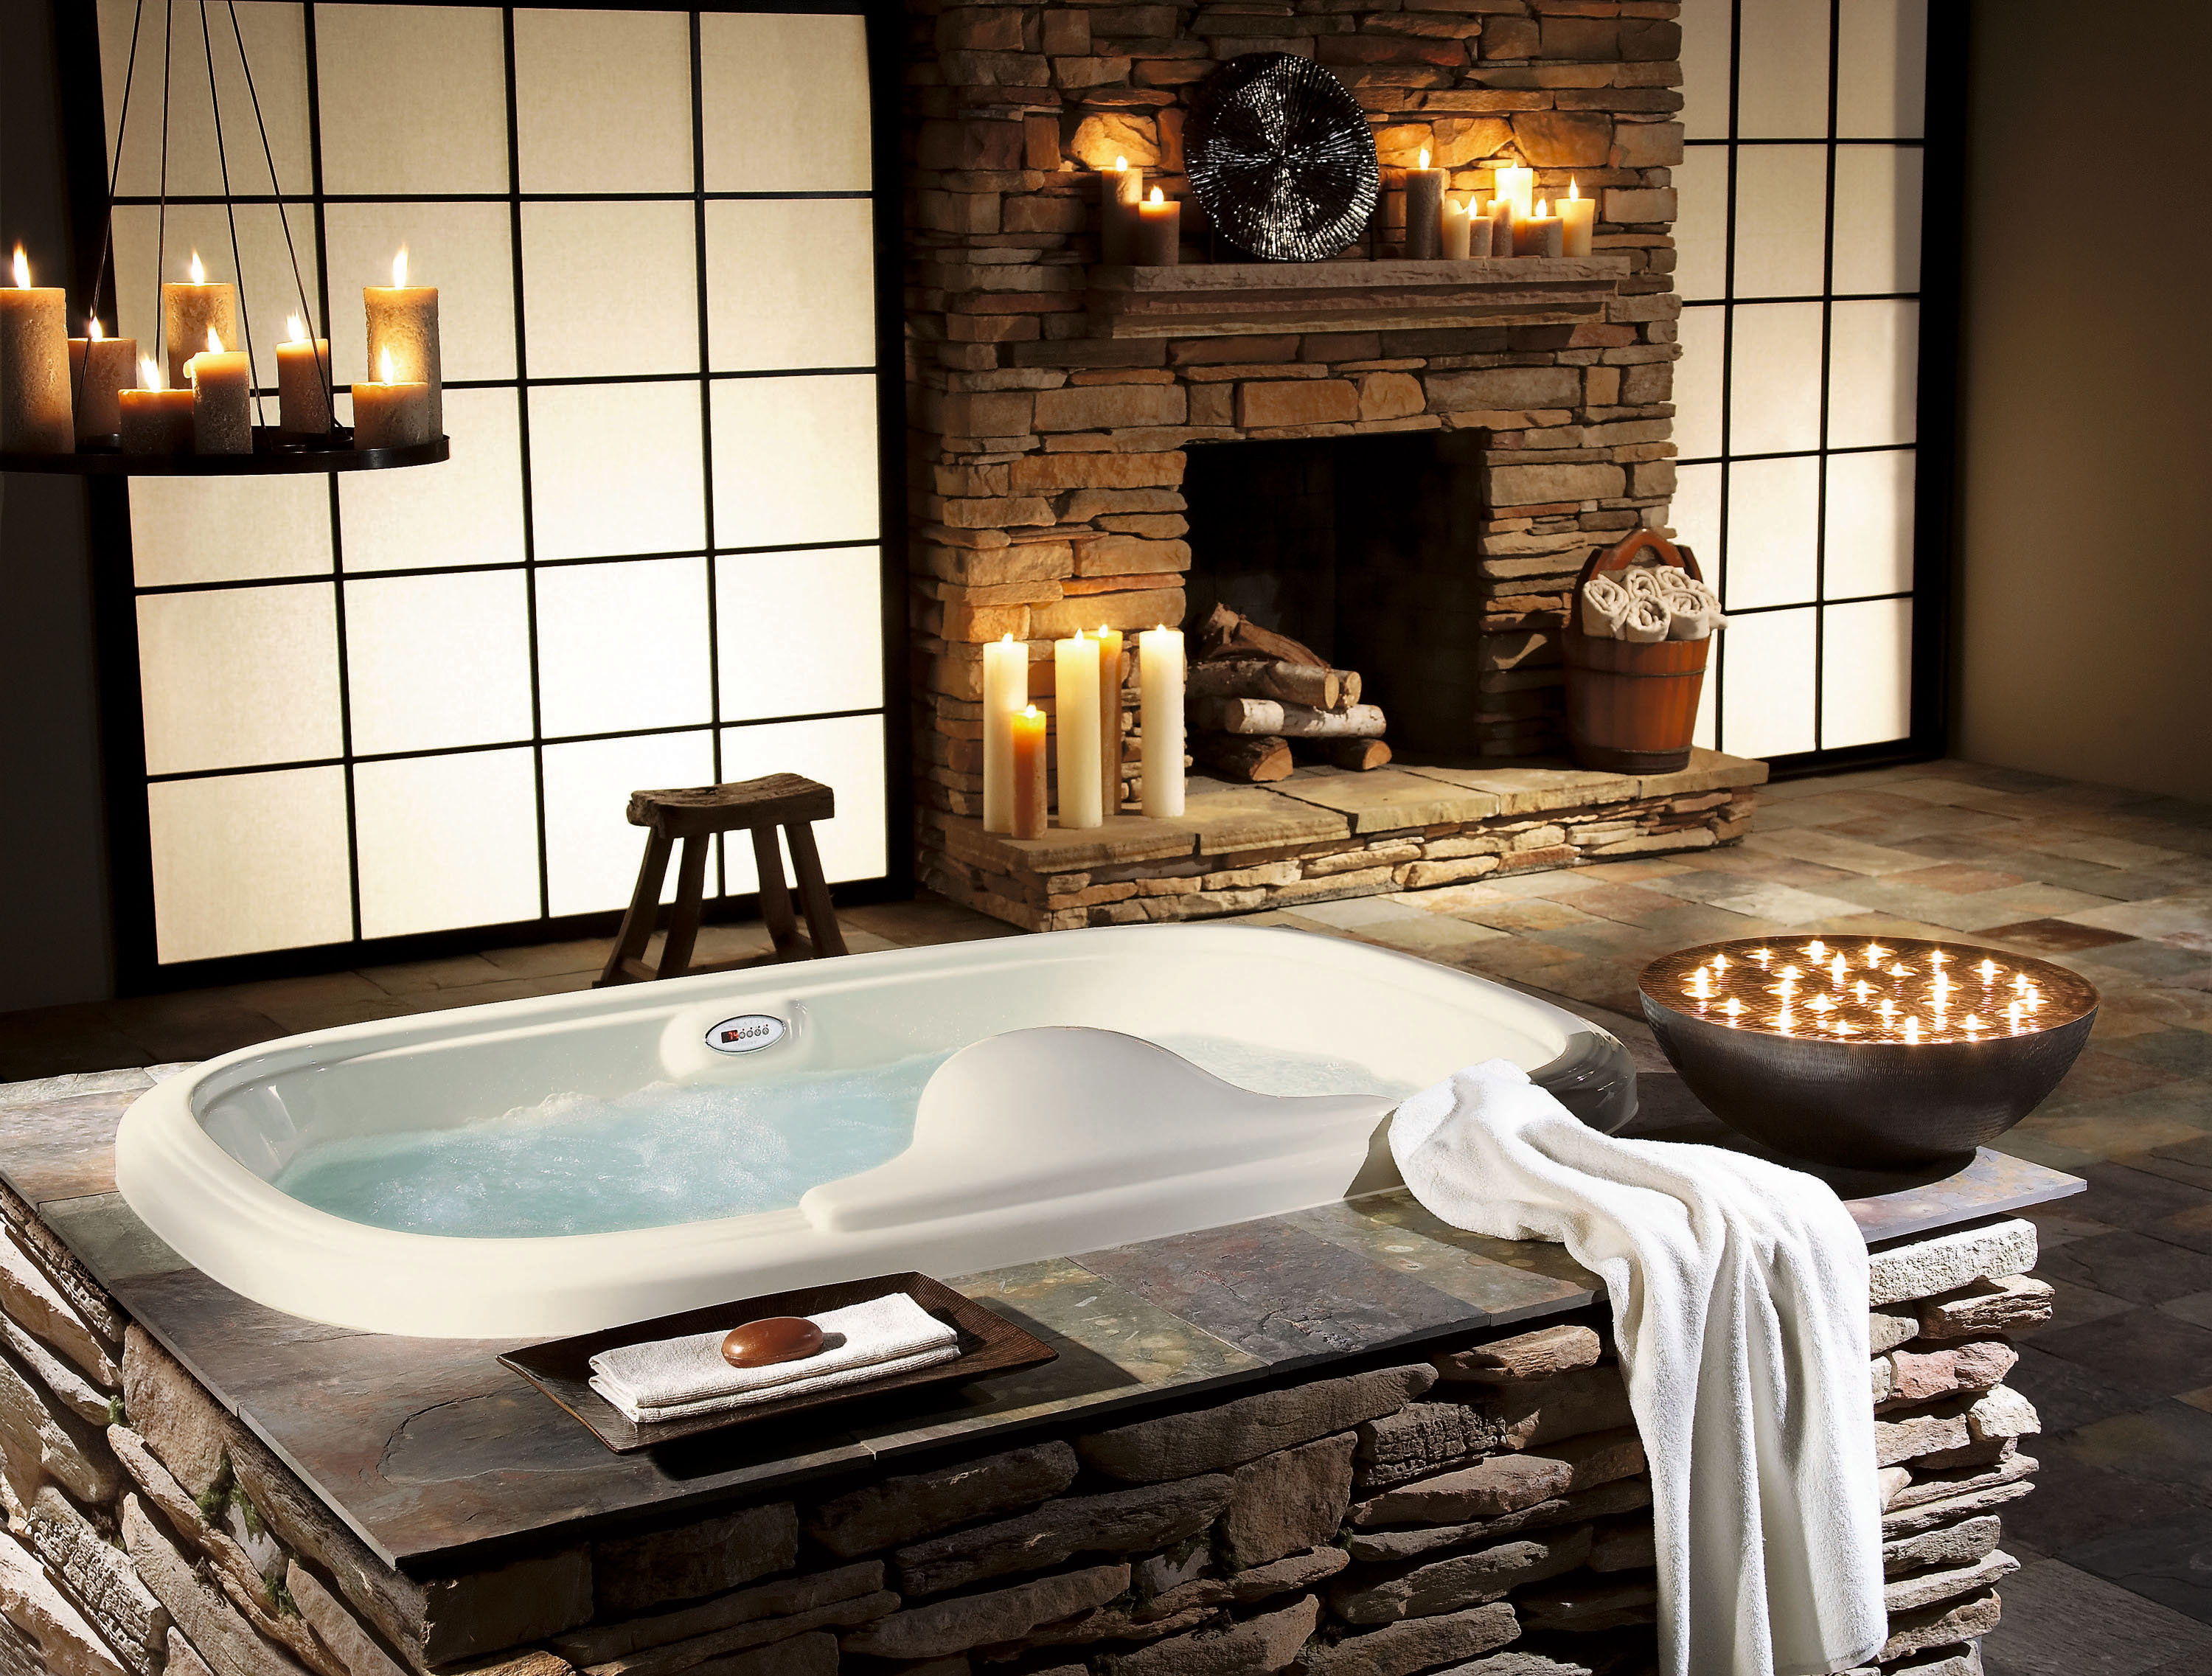 19 Astonishing Cozy Bathrooms Design Ideas With Fireplace